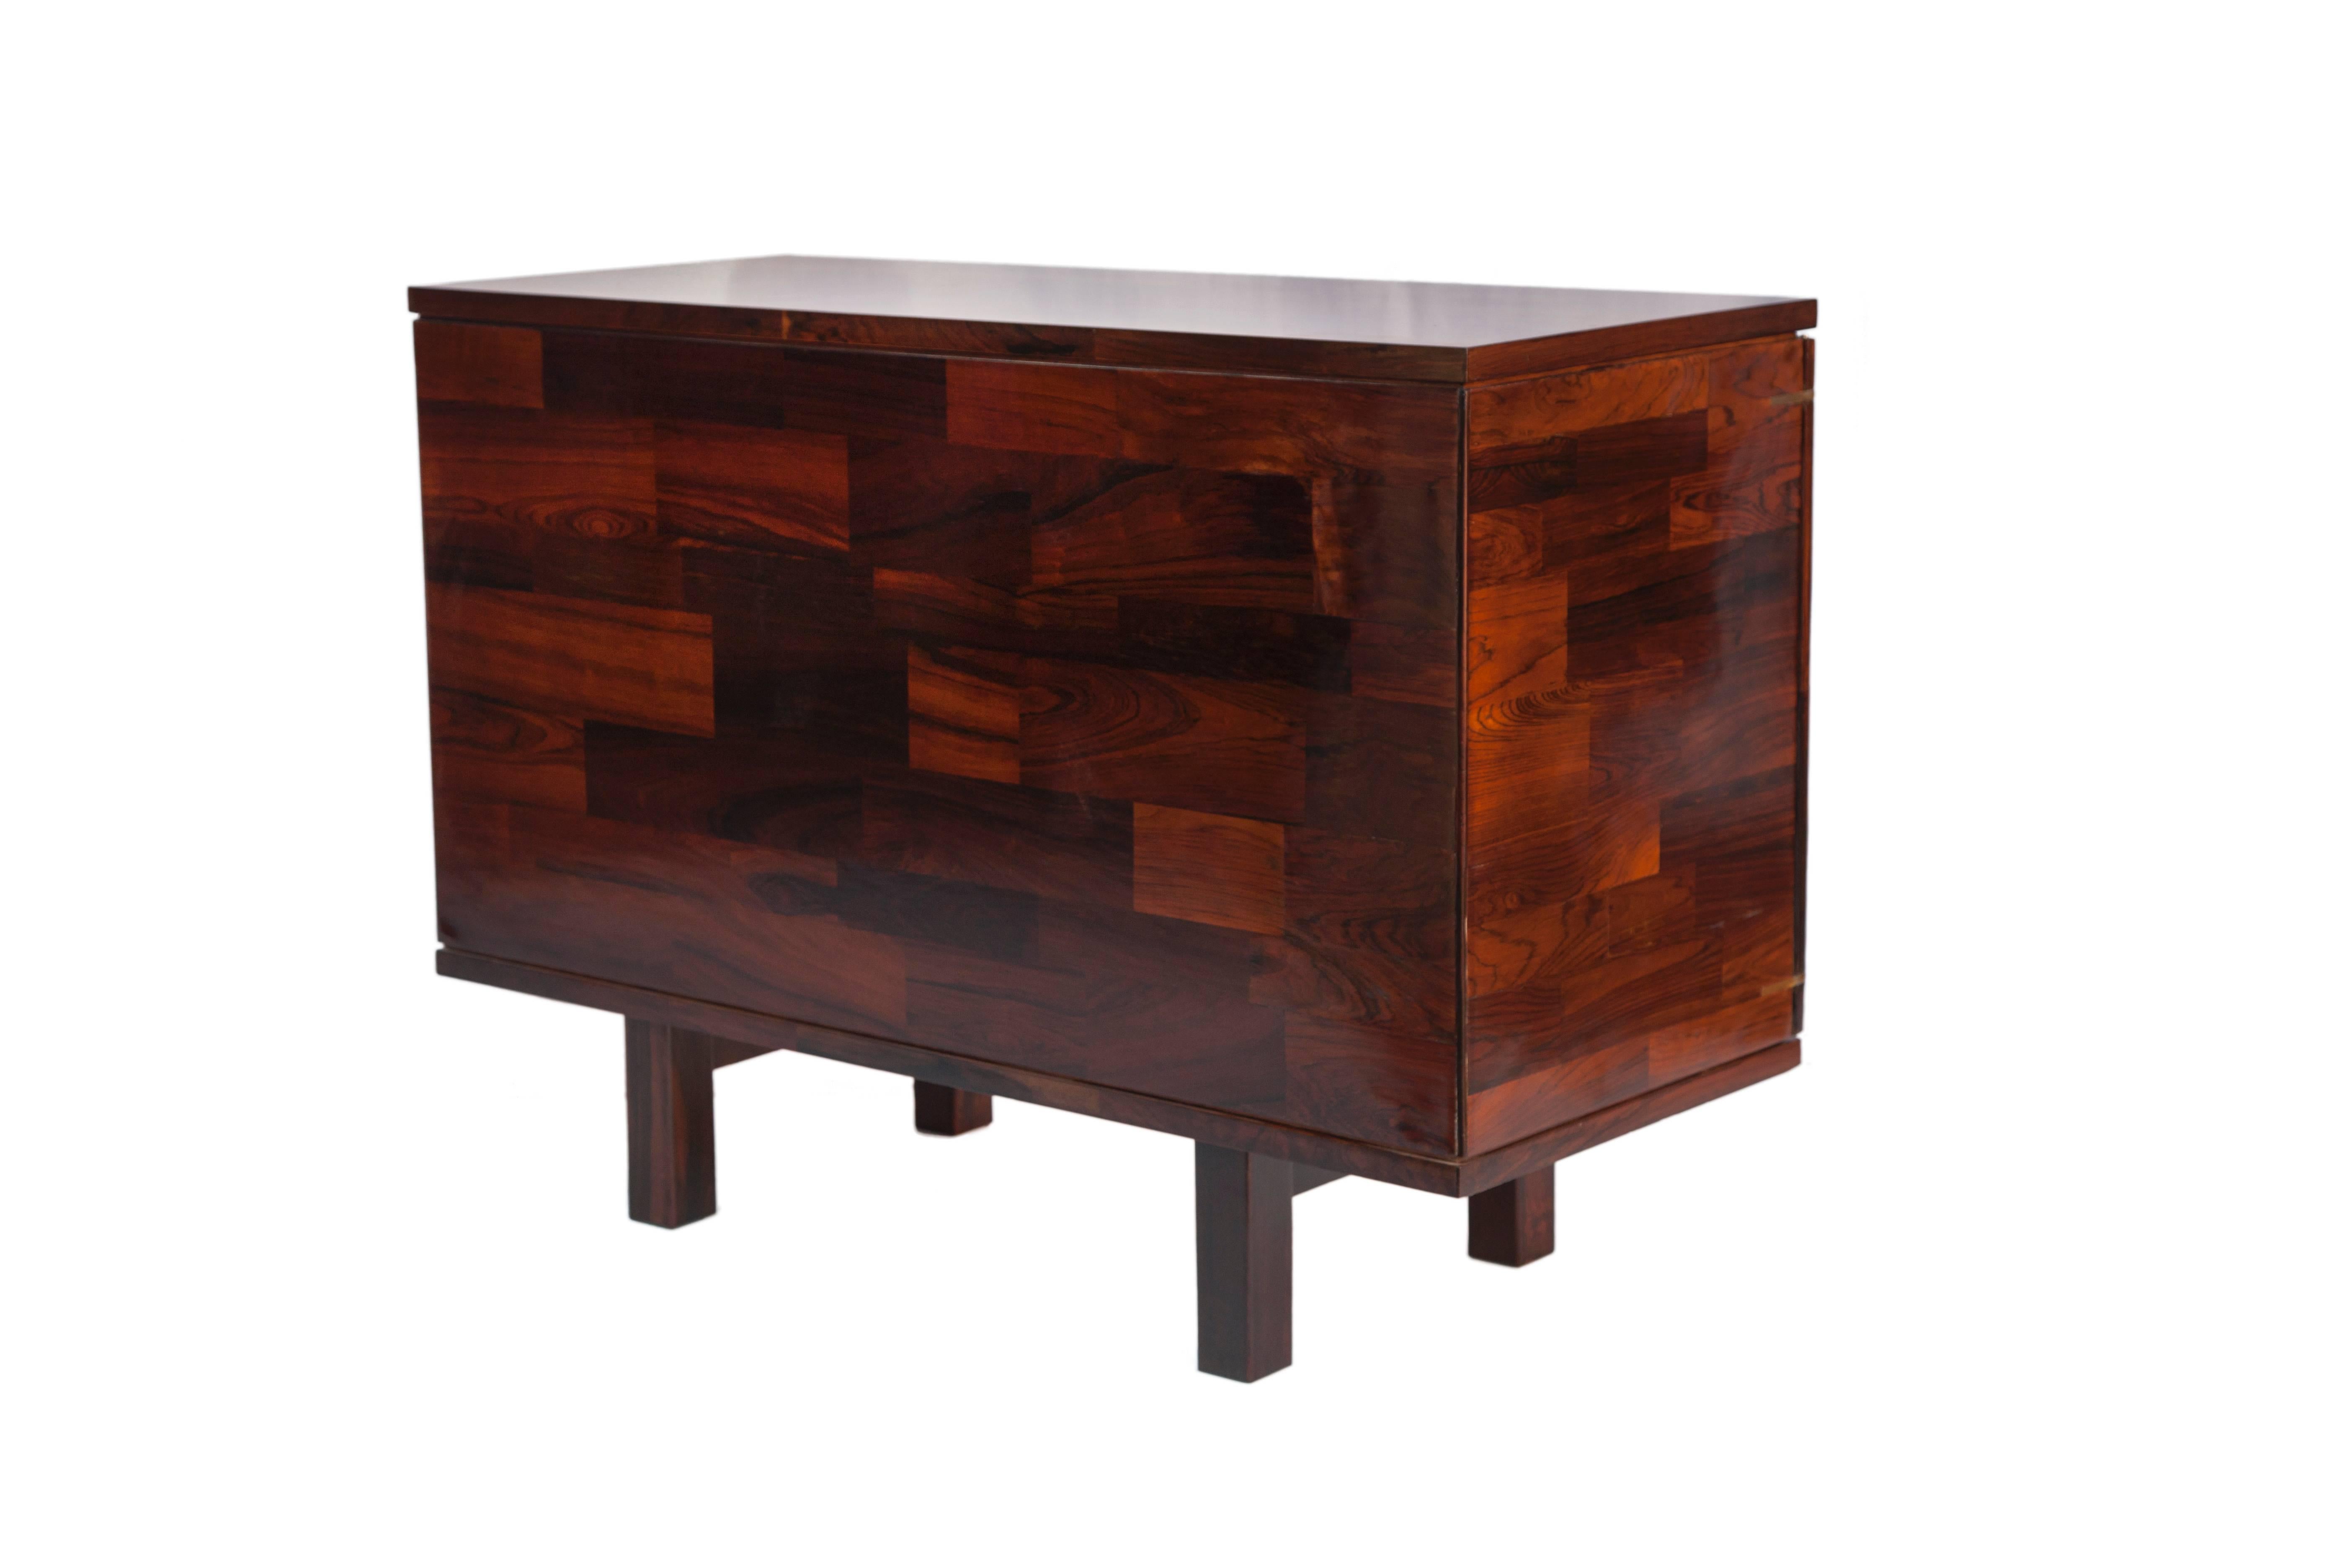 A modern rectilinear locking cabinet by Jorge Zalszupin for L'Atelier, produced circa 1960s, veneered in tiled jacaranda rosewood, the design unique to Zalszupin, with two doors, the interior with ample storage space; keys included. Very good